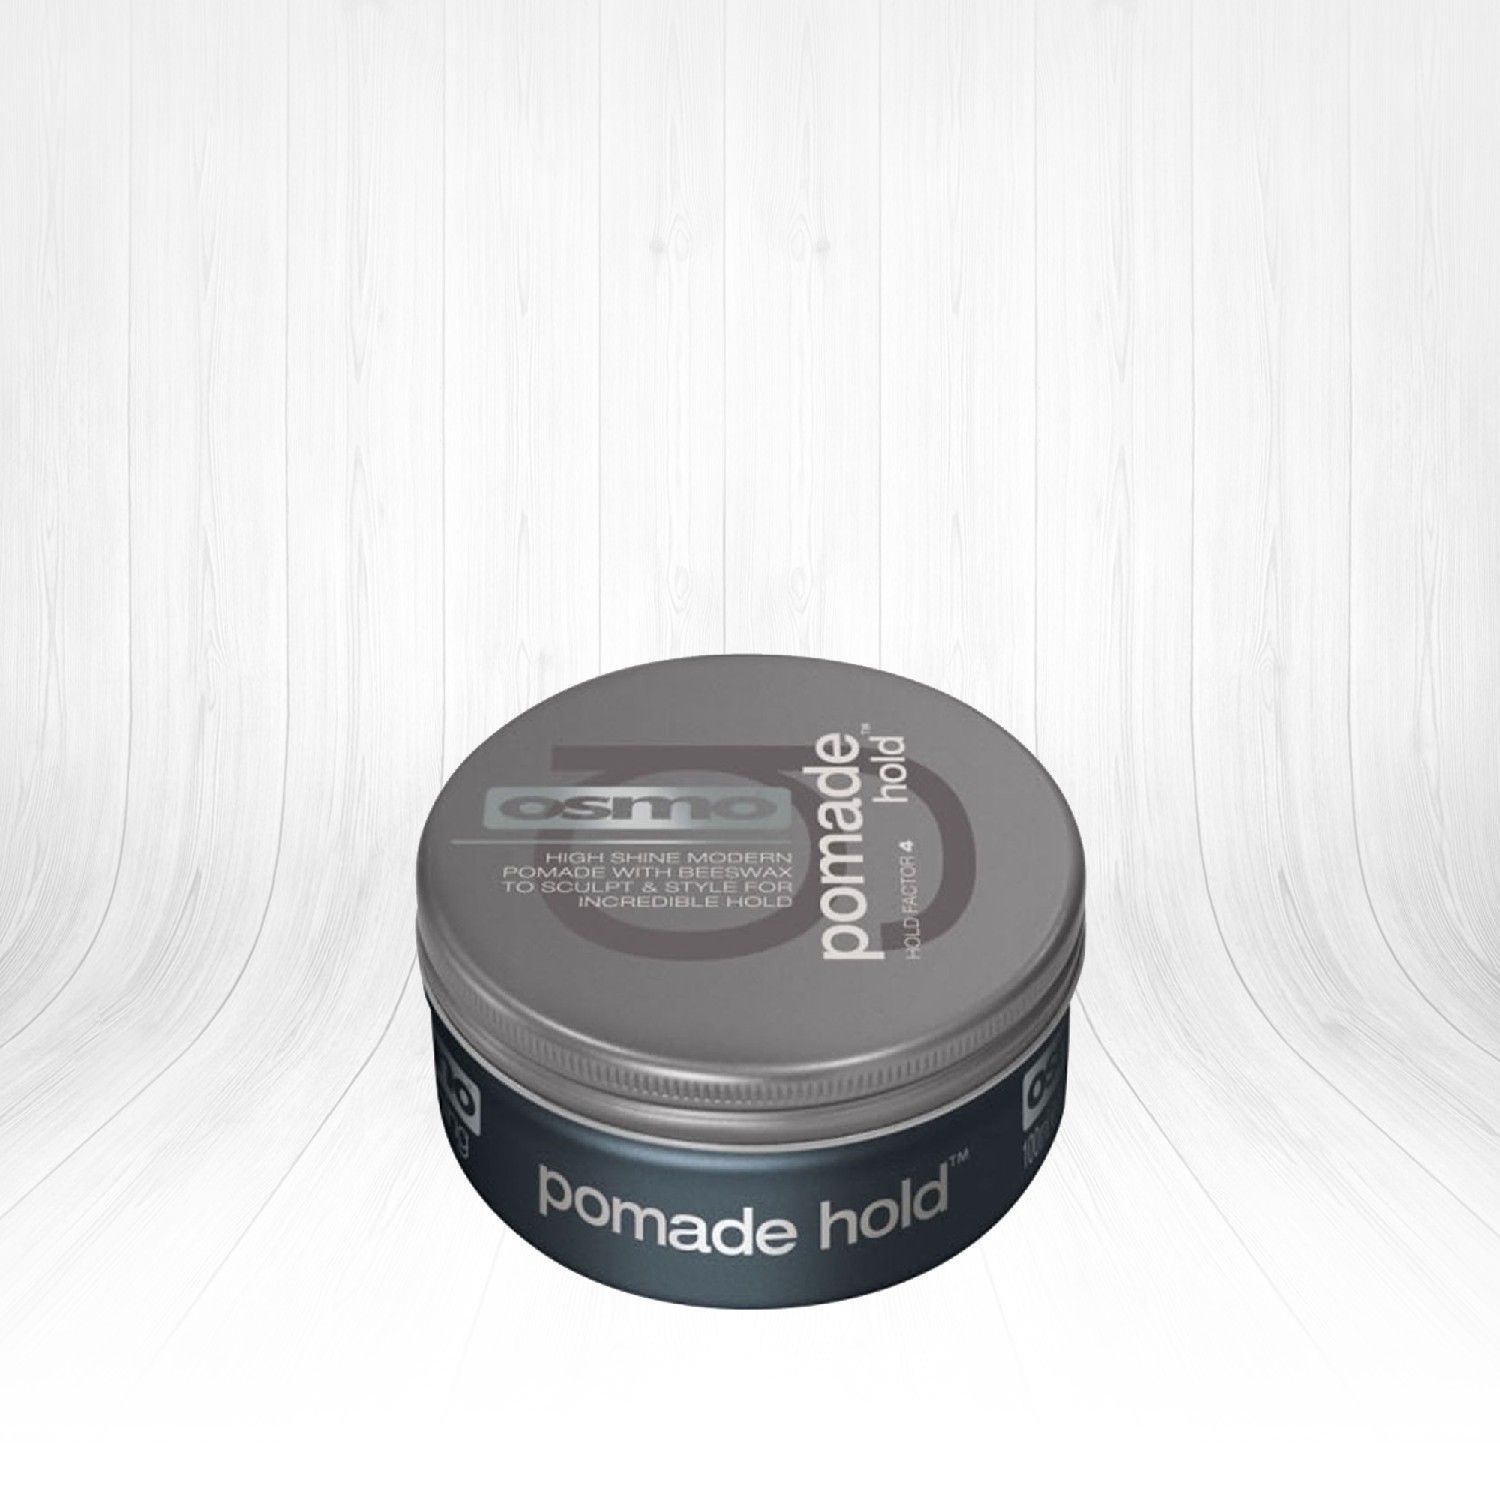 Osmo Pomade Hold Parlak Wax